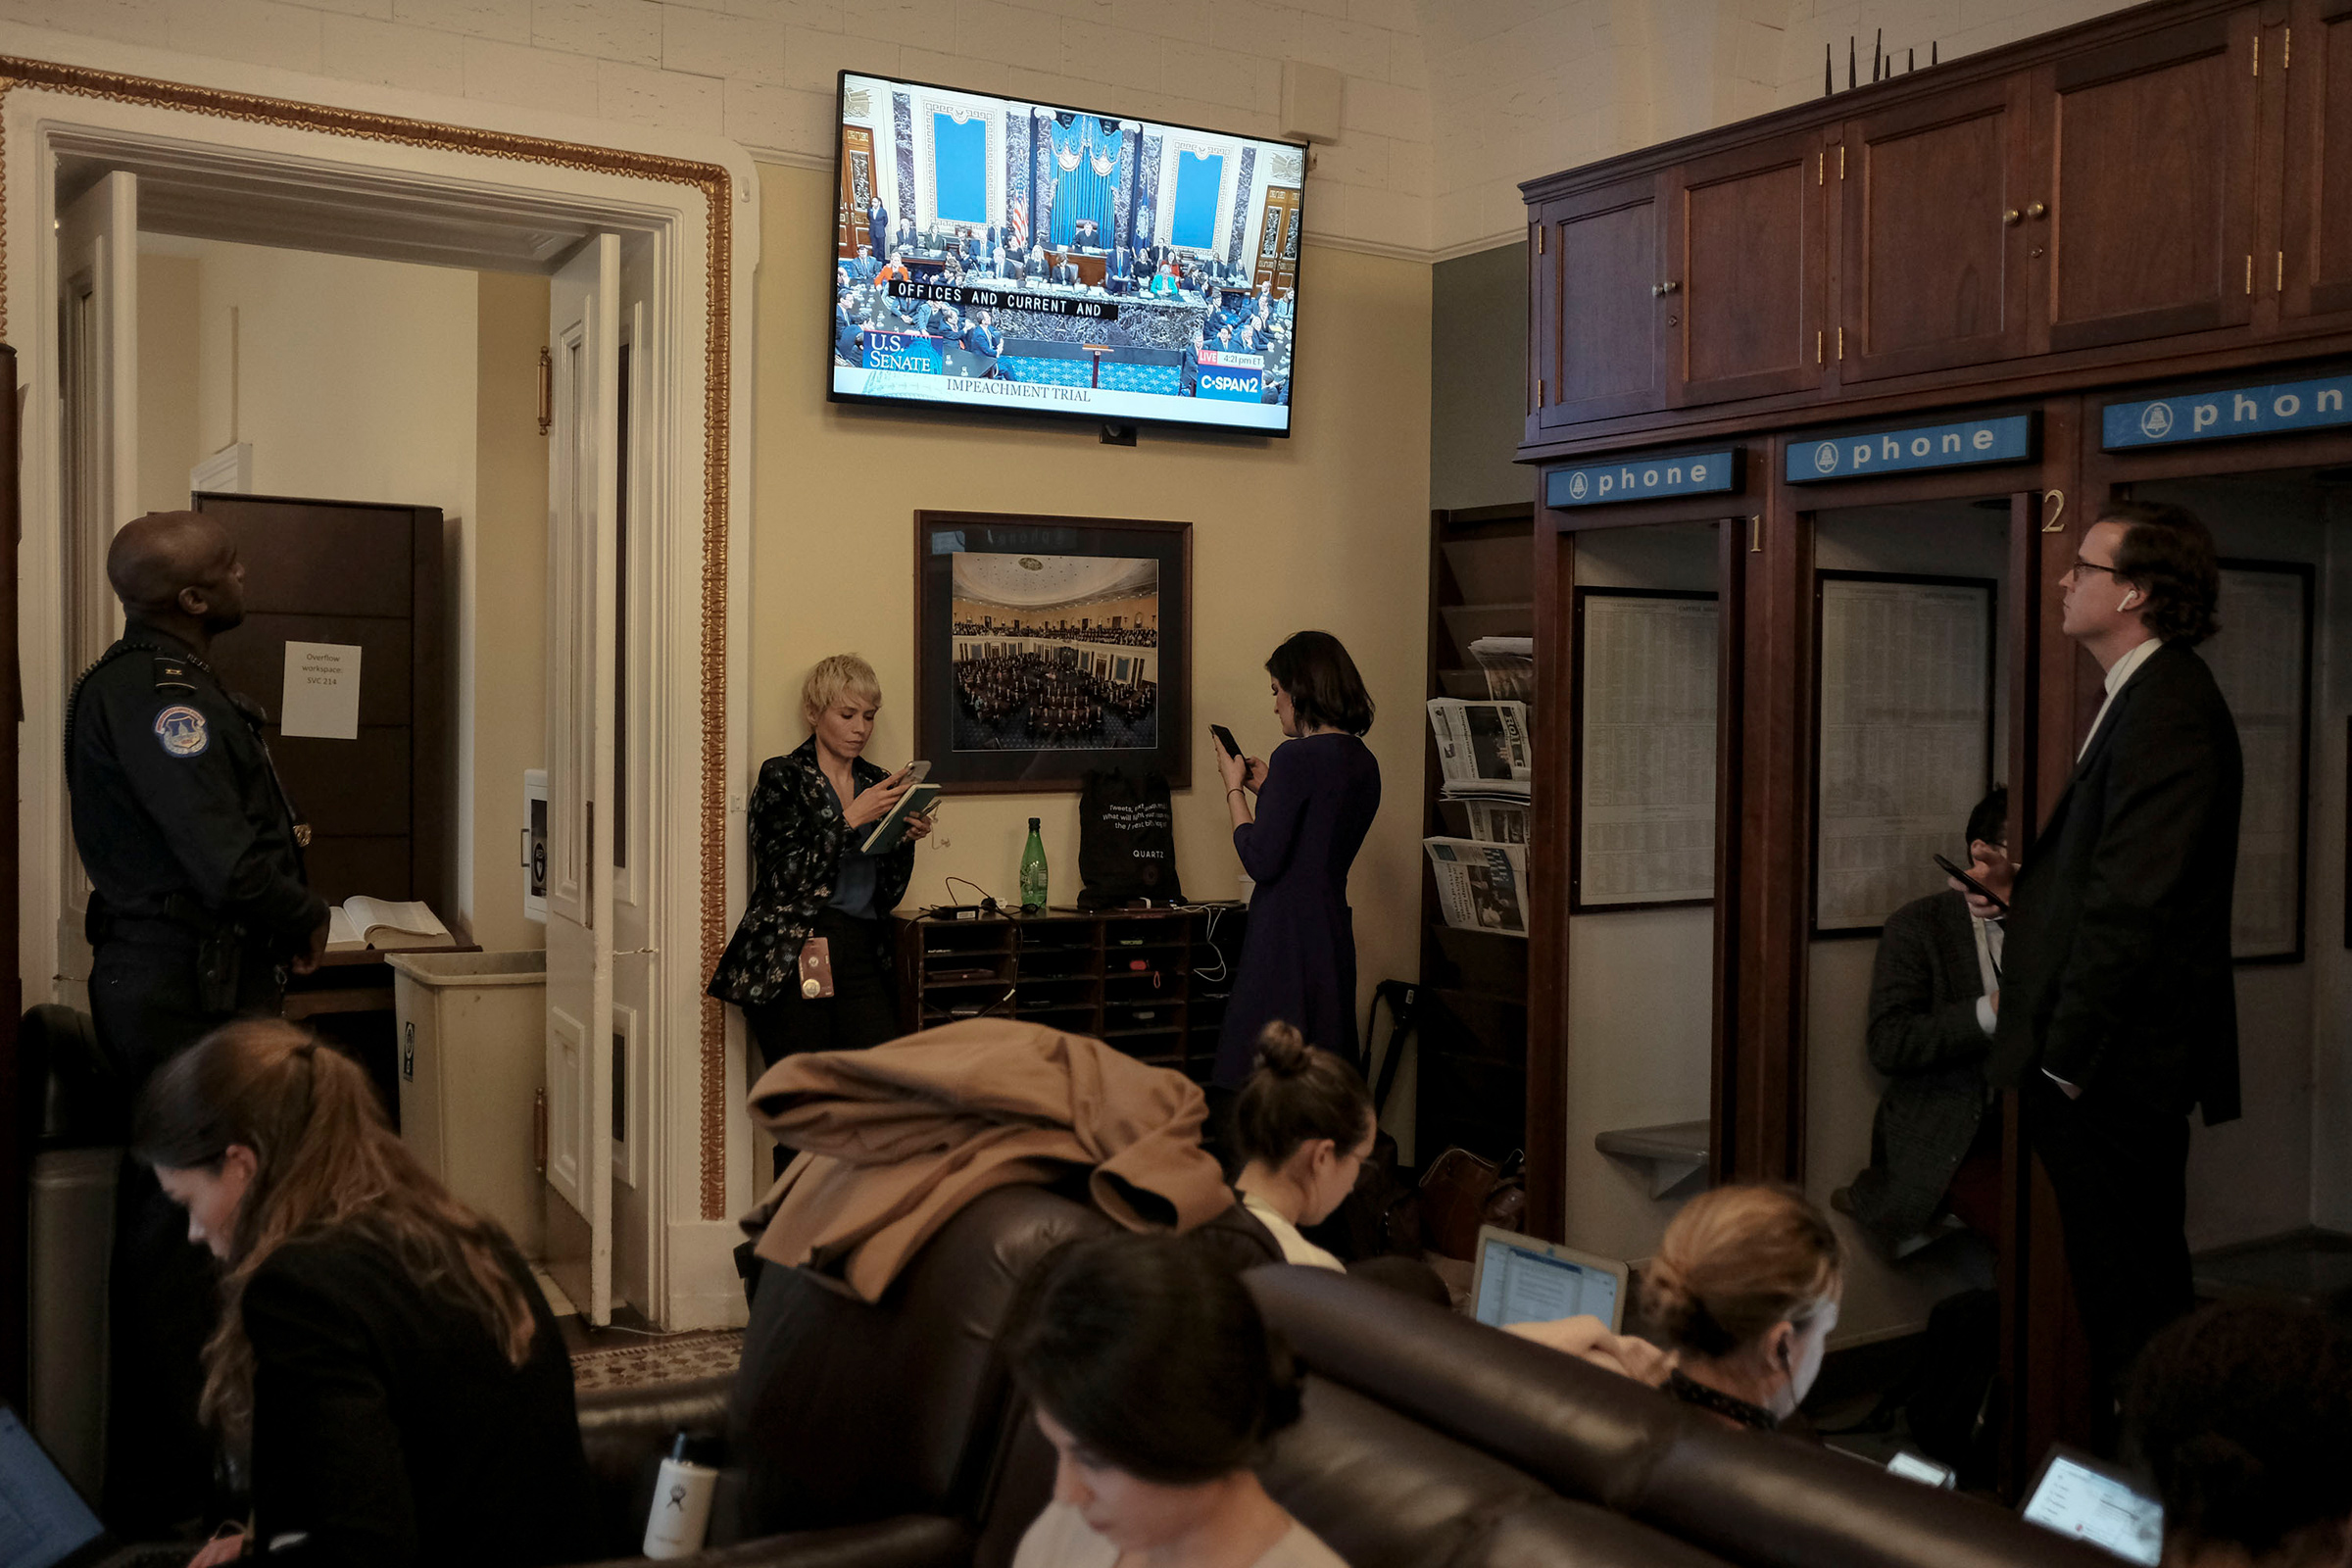 Reporters watch the Senate impeachment vote in the press gallery at the Capitol in Washington, D.C., on Feb. 5, 2020.